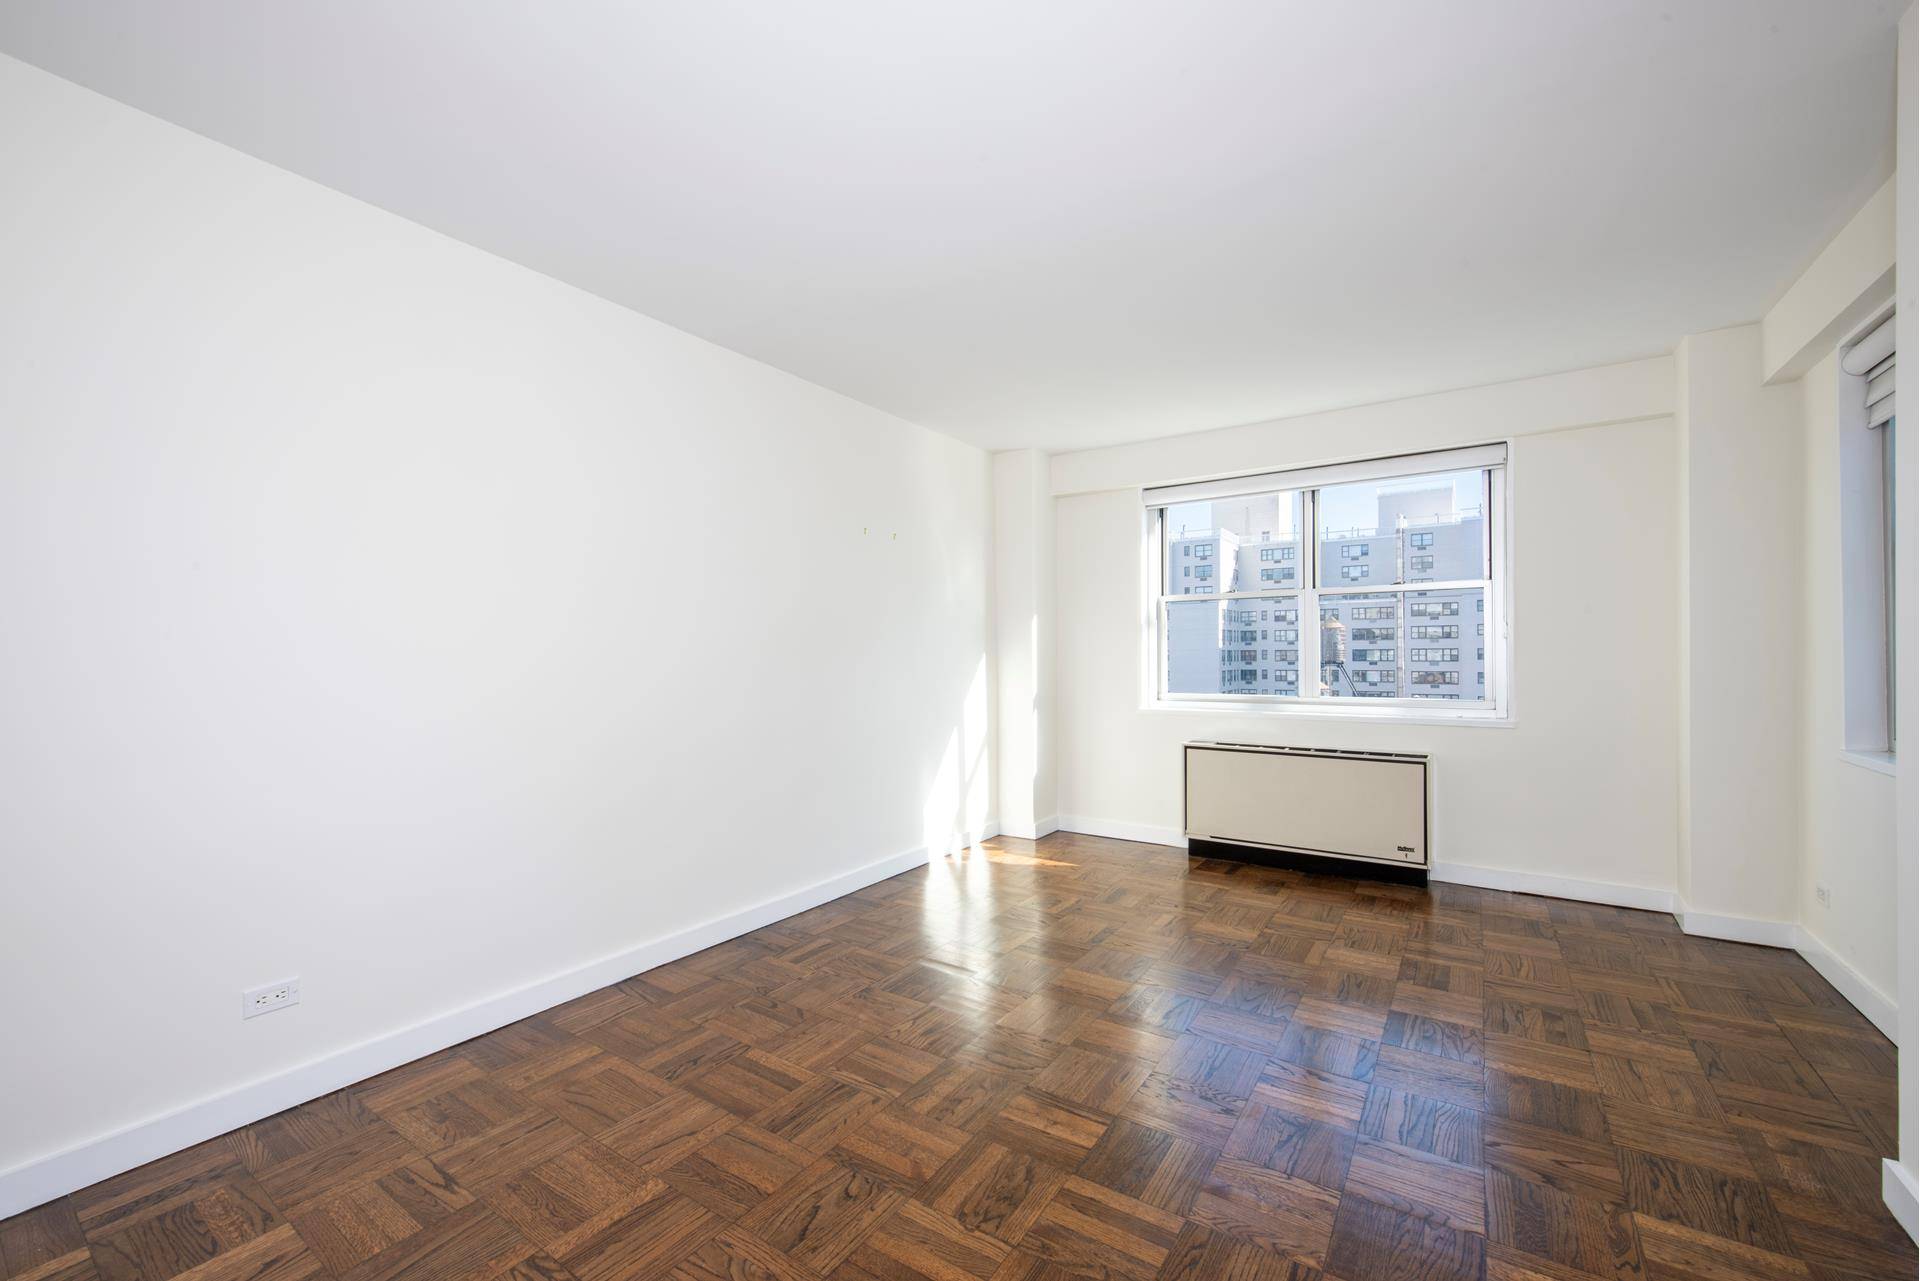 Designed in 1960 by well known modern architects Sylvan amp ; Robert Bien, this downtown light, spacious two bedroom, two bath corner apartment offers generously sized rooms and gracious layout ...